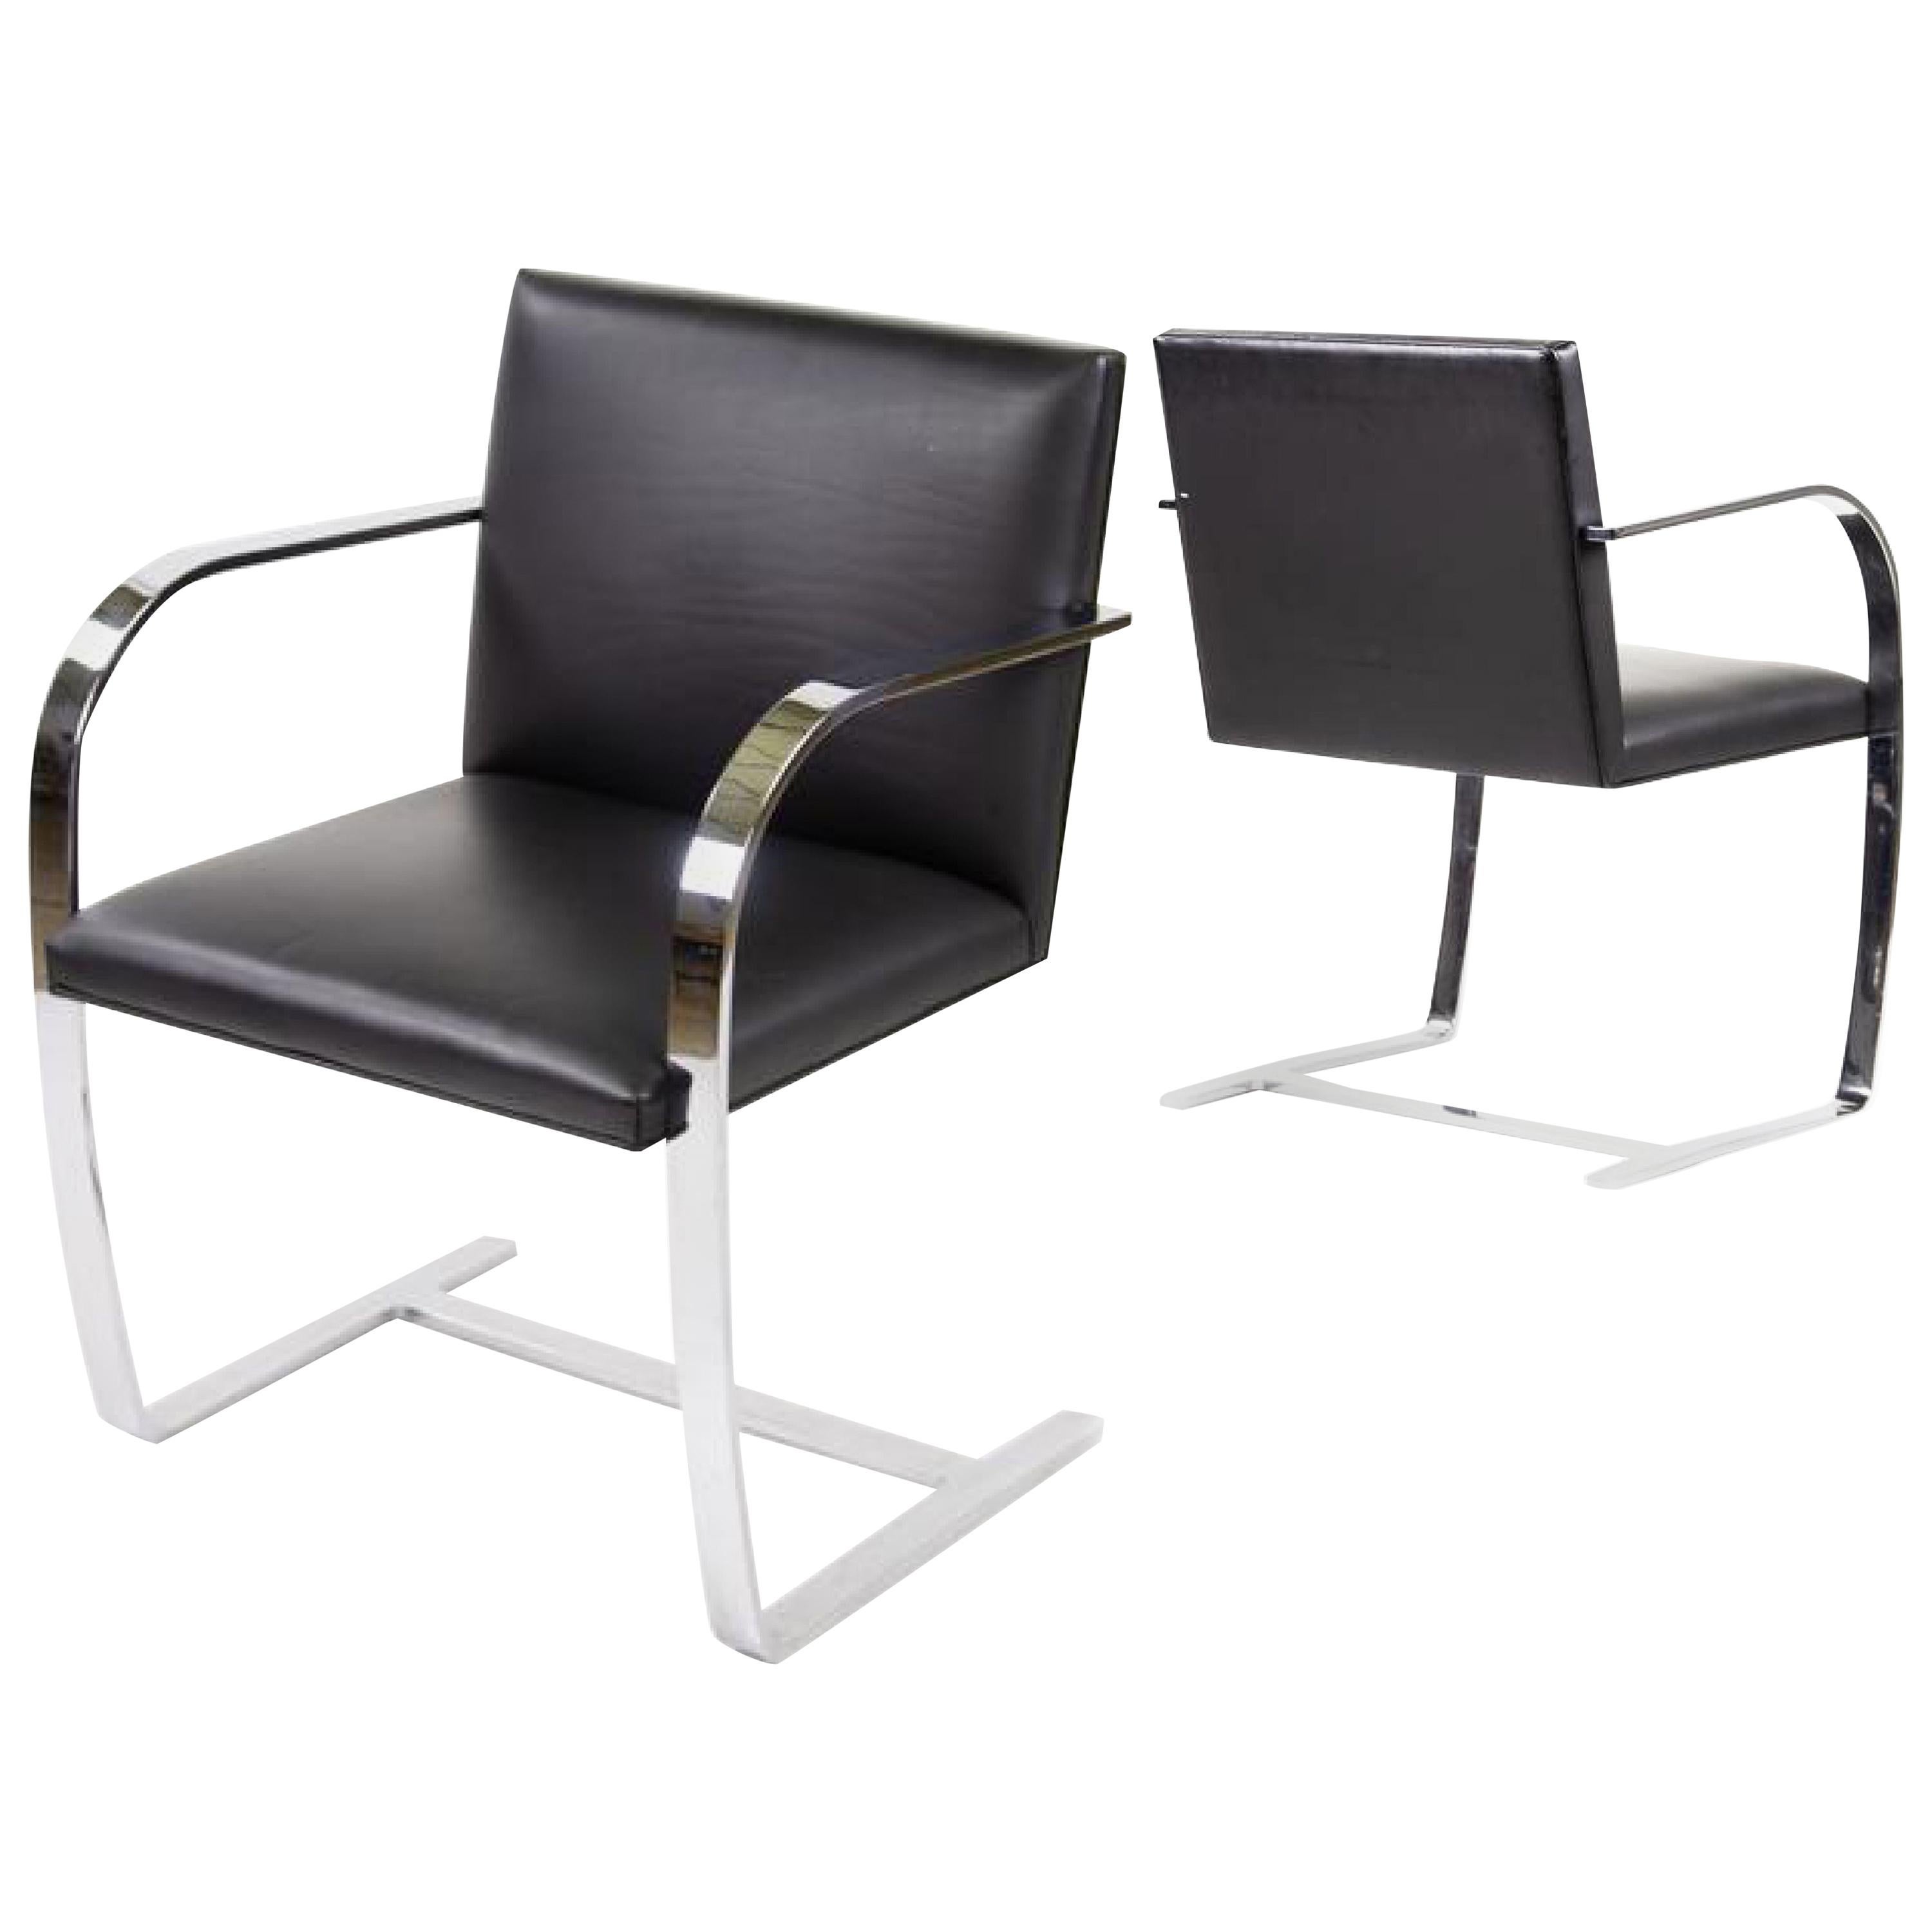 Knoll 255-304 Stainless Brno Chair, Flat Bar, Mies van der Rohe, Black leather